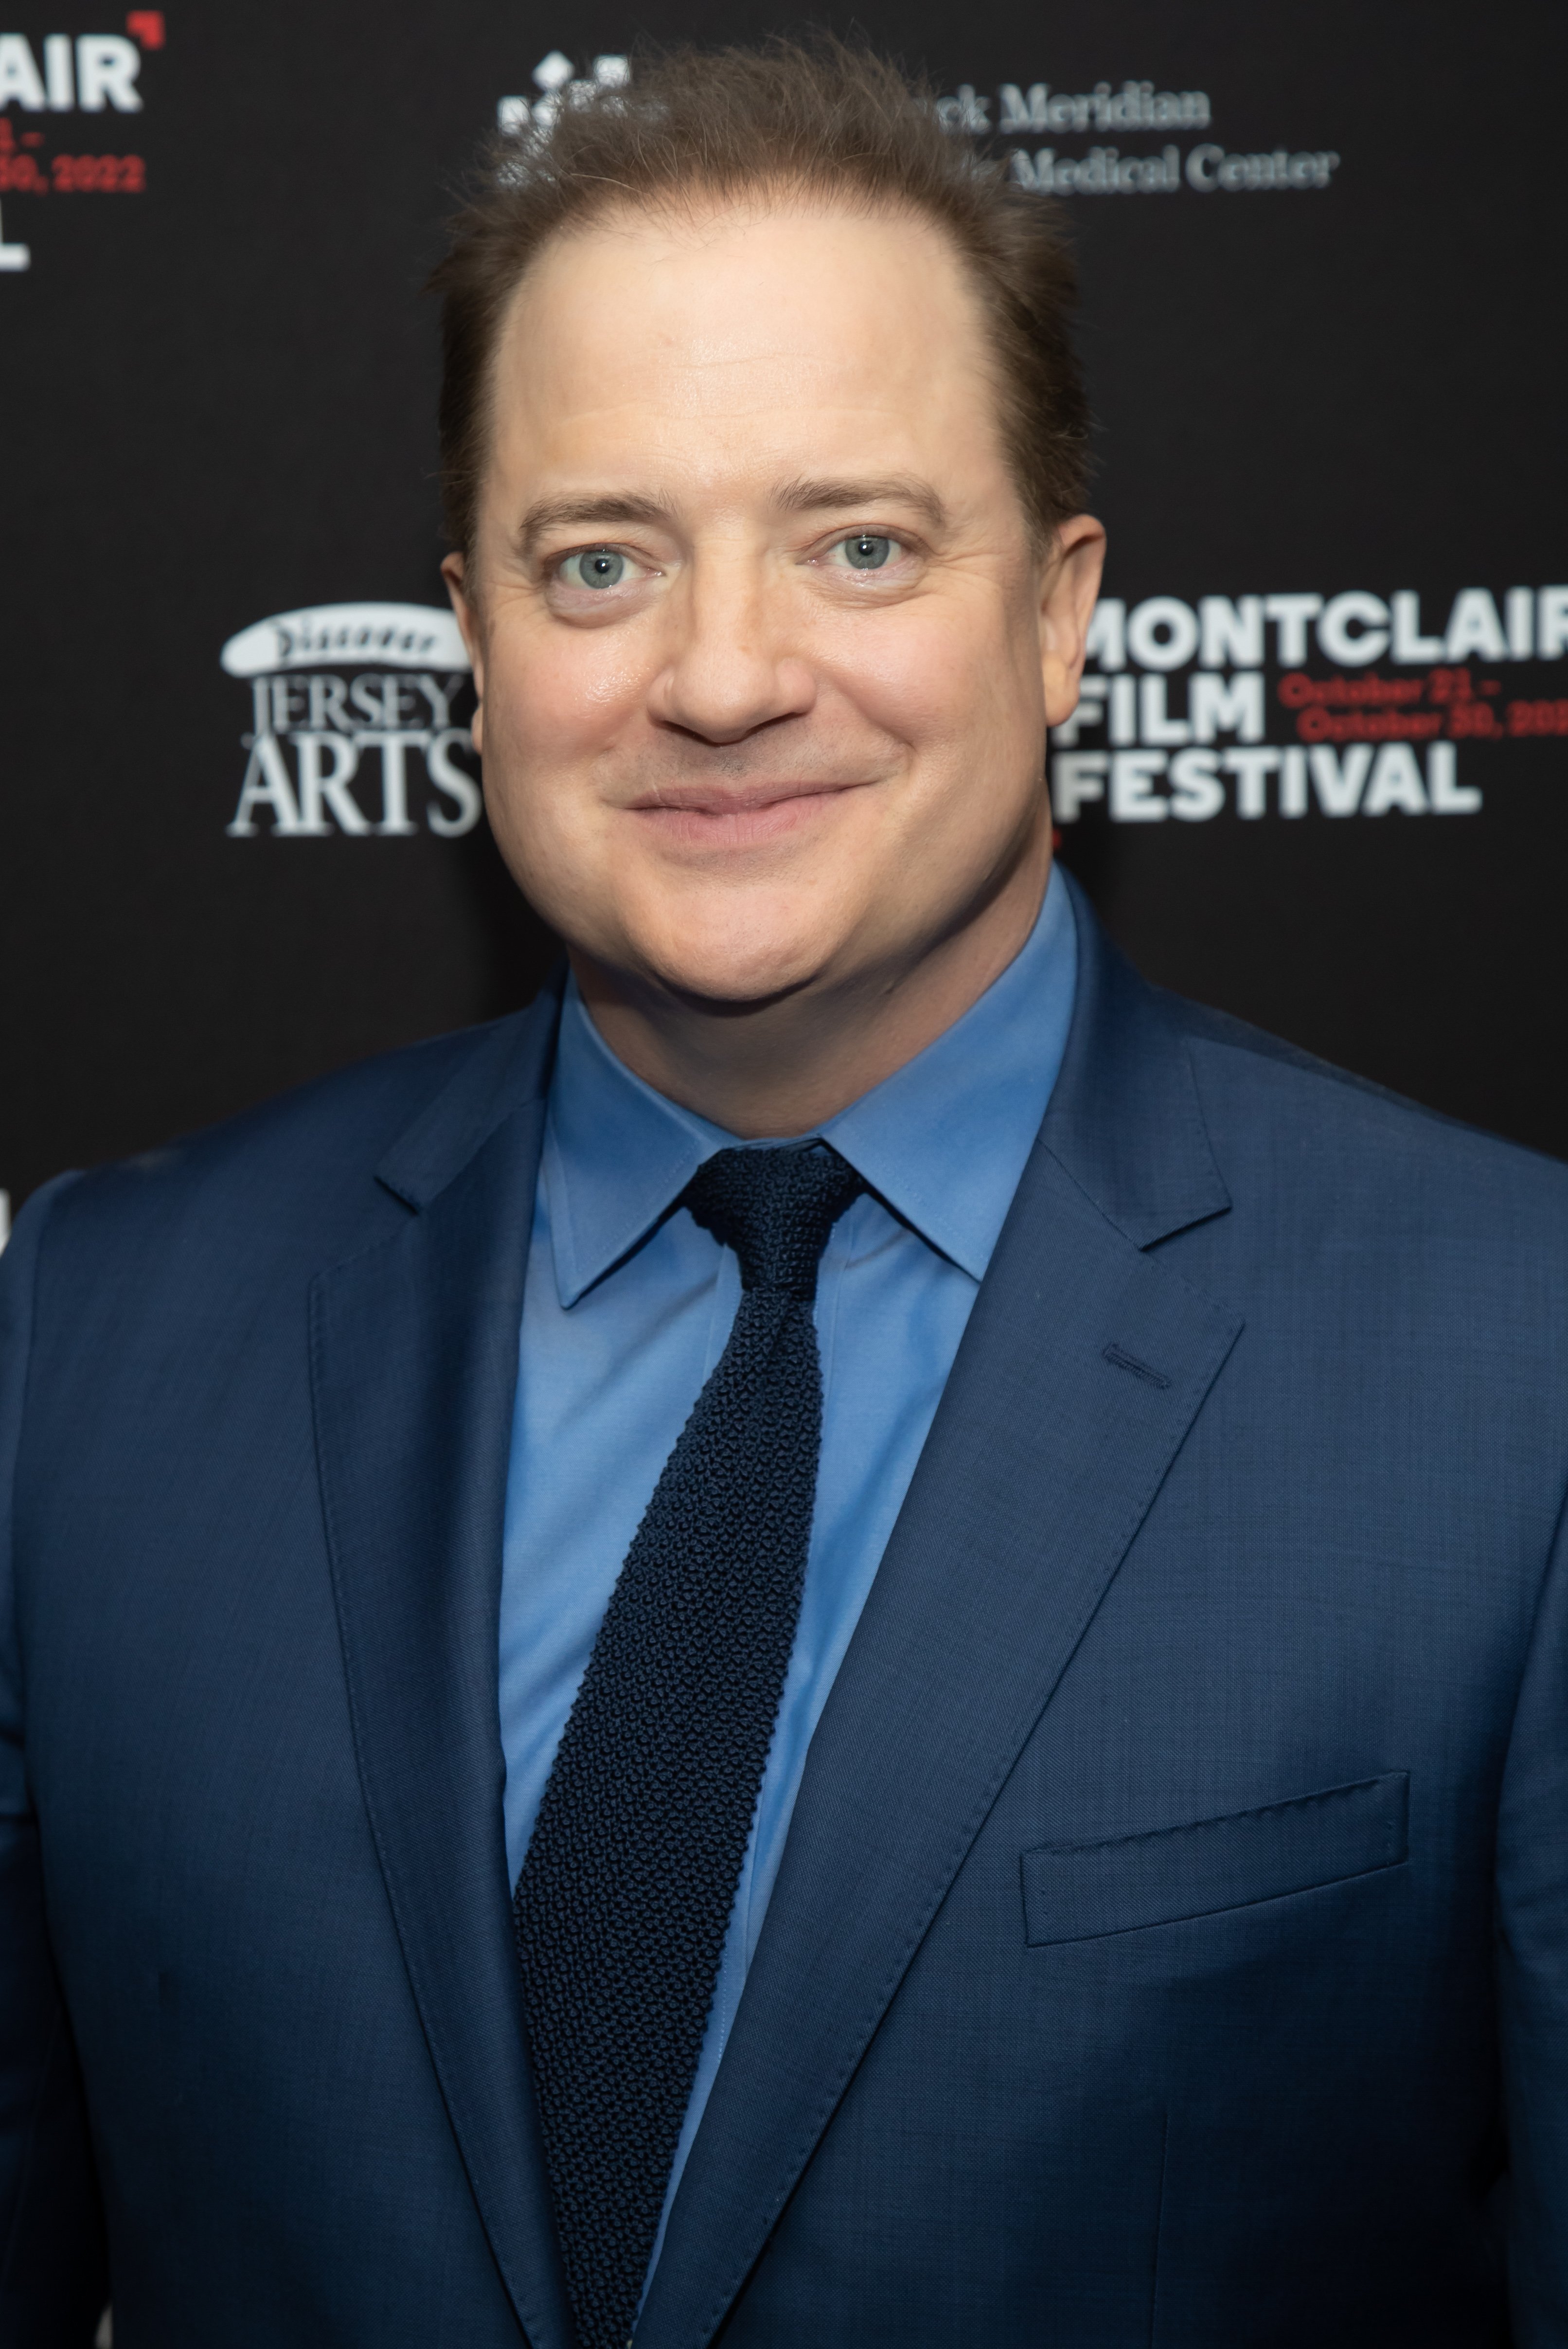 Brendan Fraser attends a screening of "The Whale" during the 2022 Montclair Film Festival at The Wellmont Theatre on October 23, 2022 in Montclair, New Jersey | Source: Getty Images 